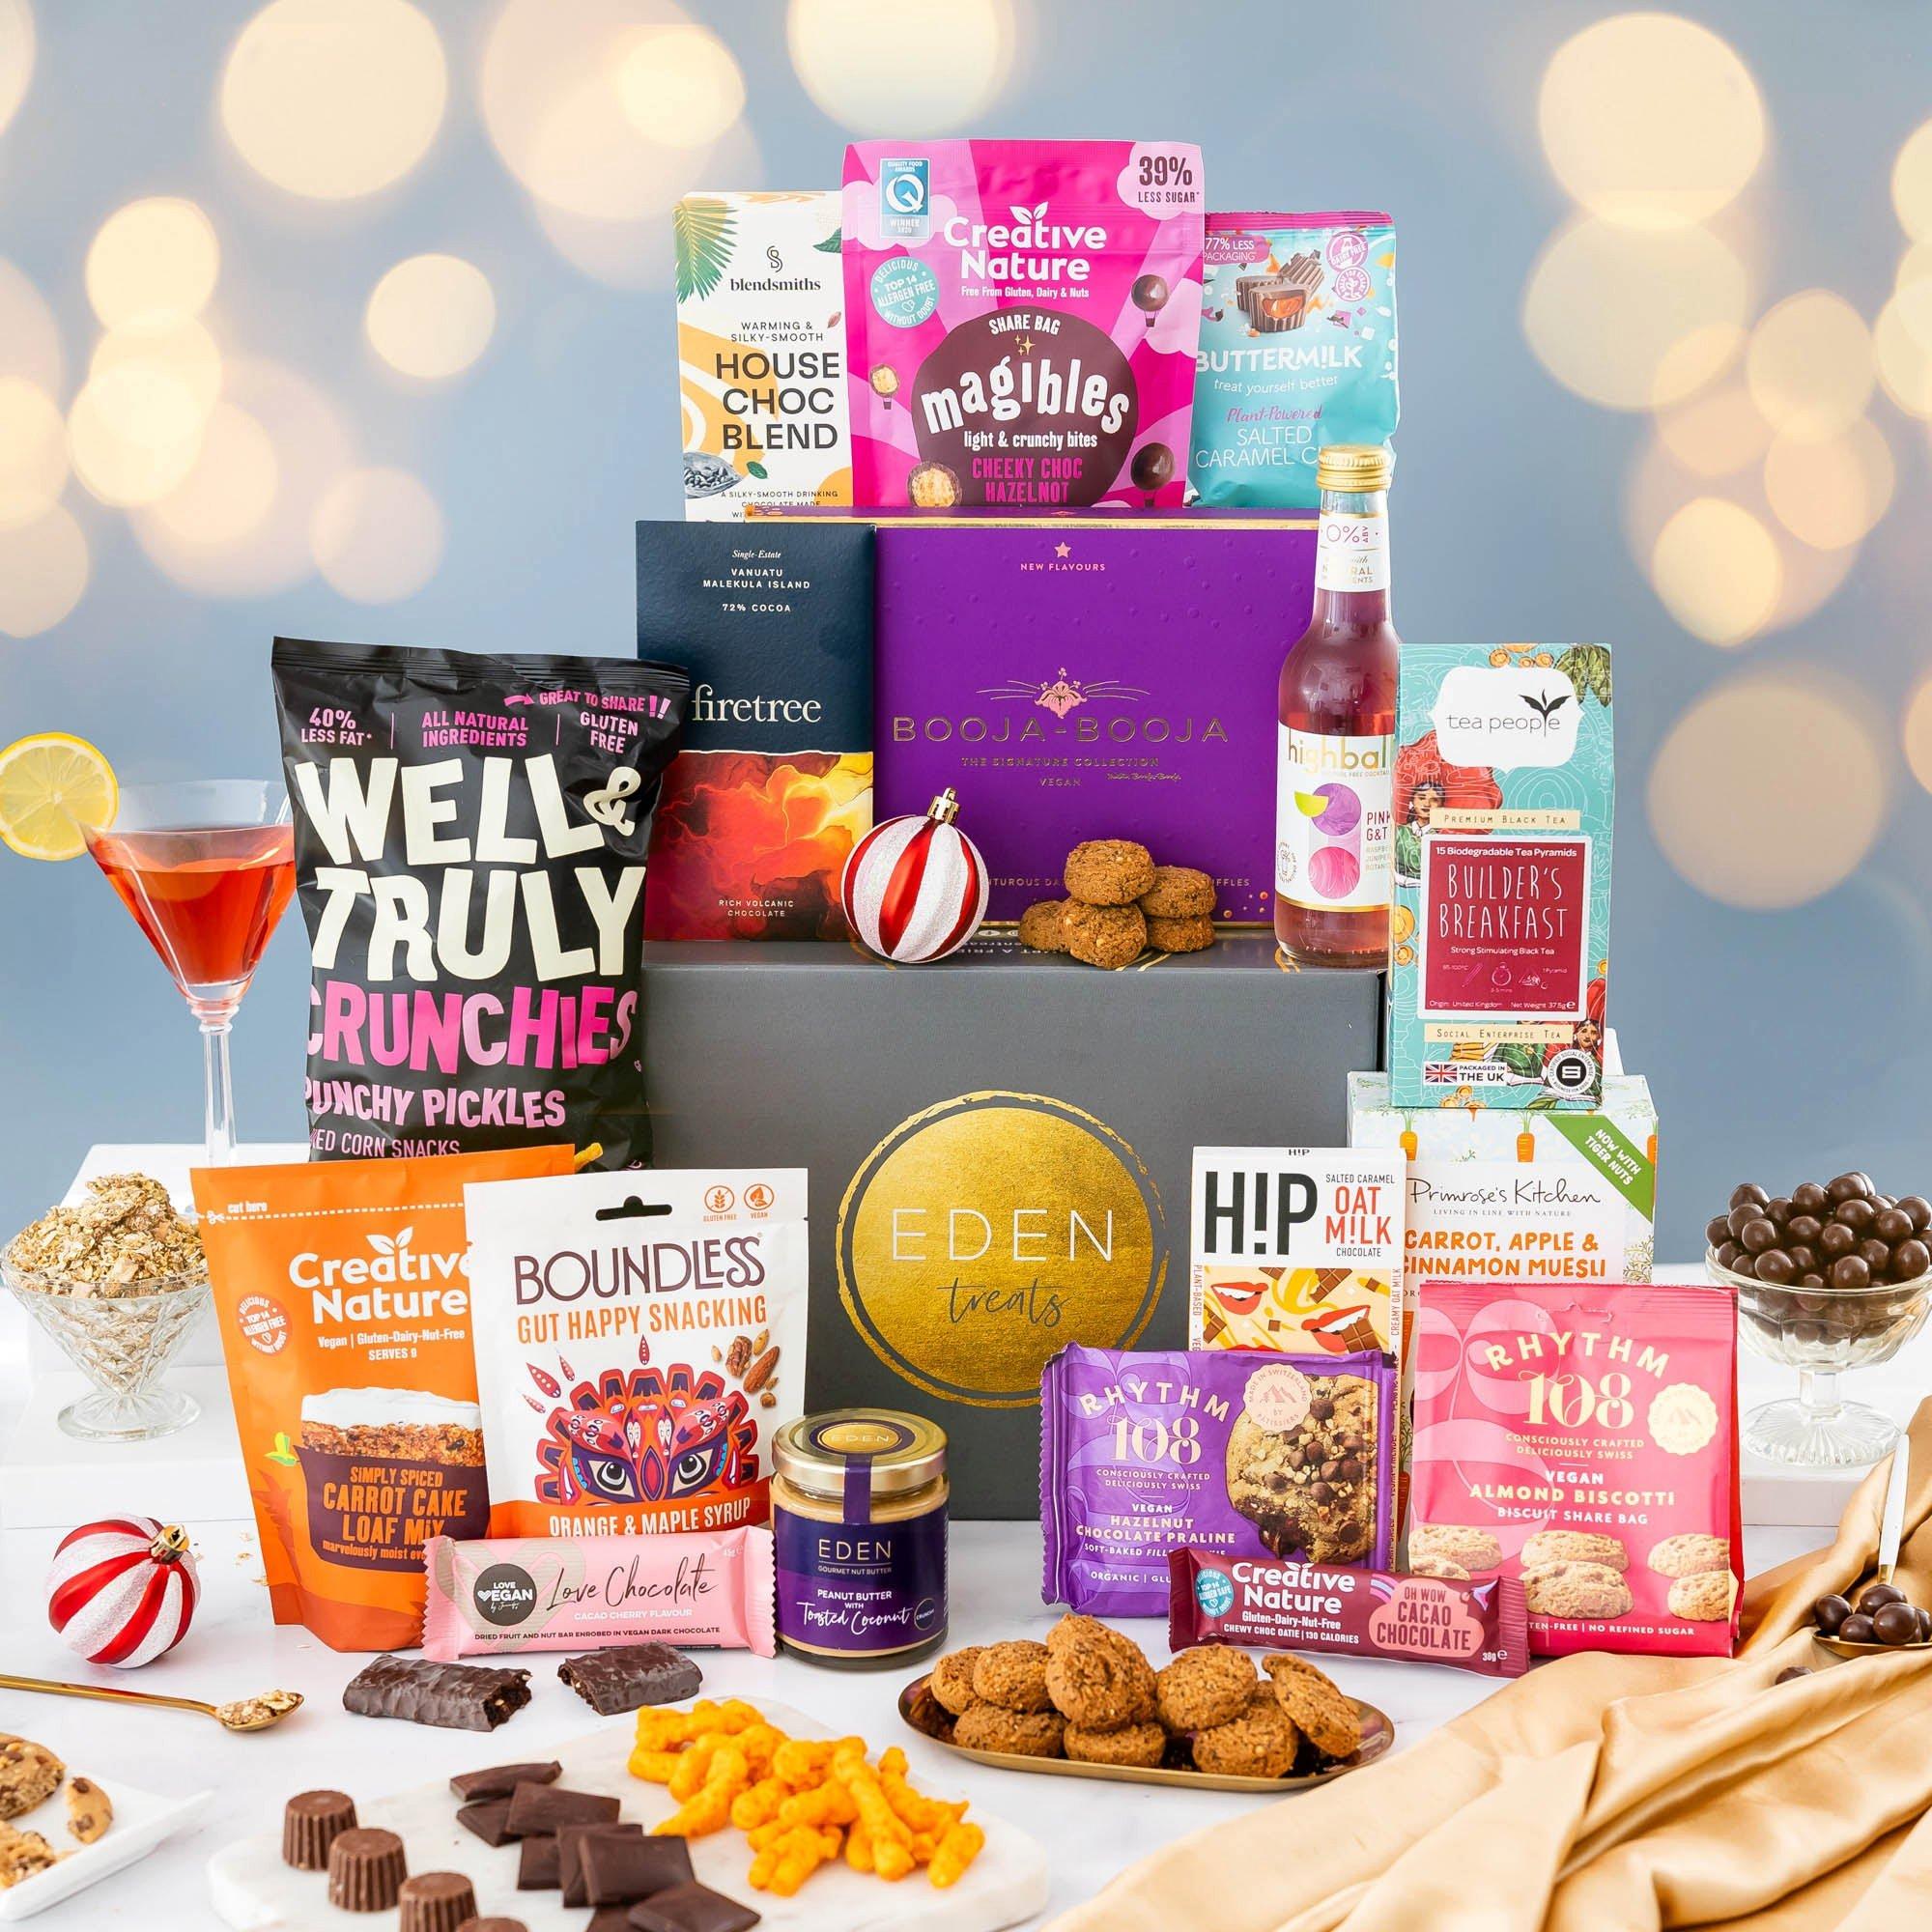 Deluxe Food & Drink Hamper with EDEN Limited Edition2 x Mocktails (Non Alcoholic) - Vegan & Gluten F